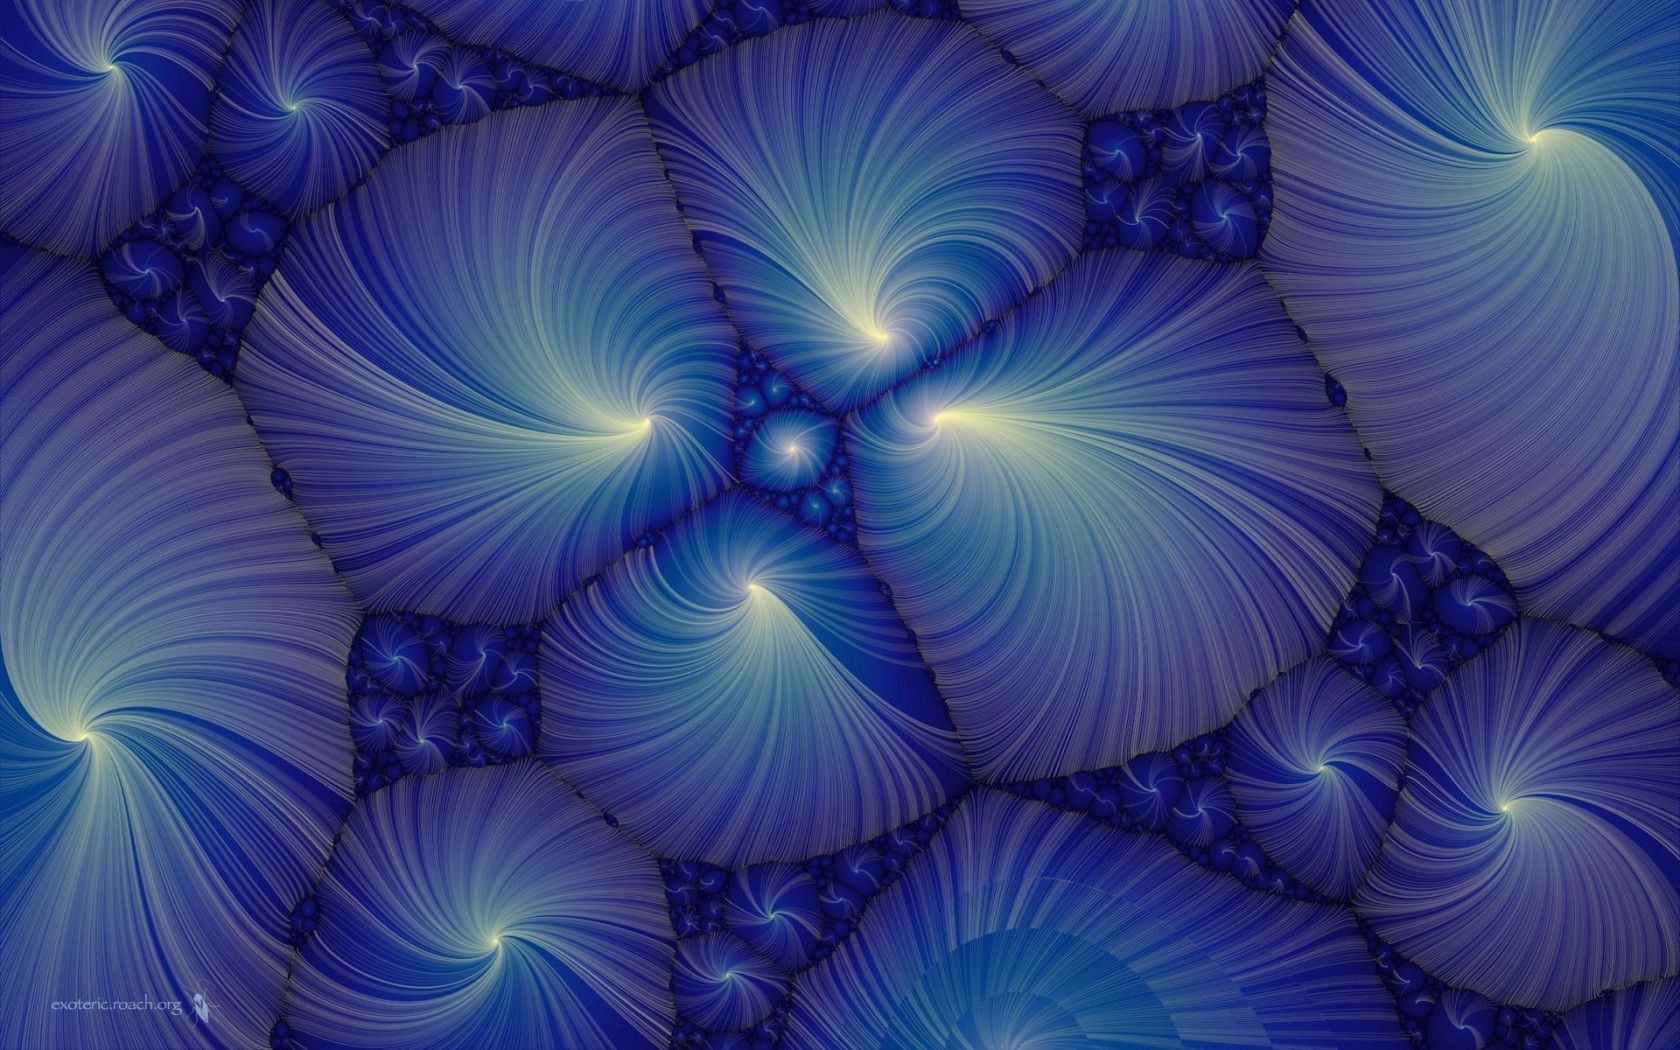 52956 download wallpaper blue, patterns, abstract, fractal screensavers and pictures for free